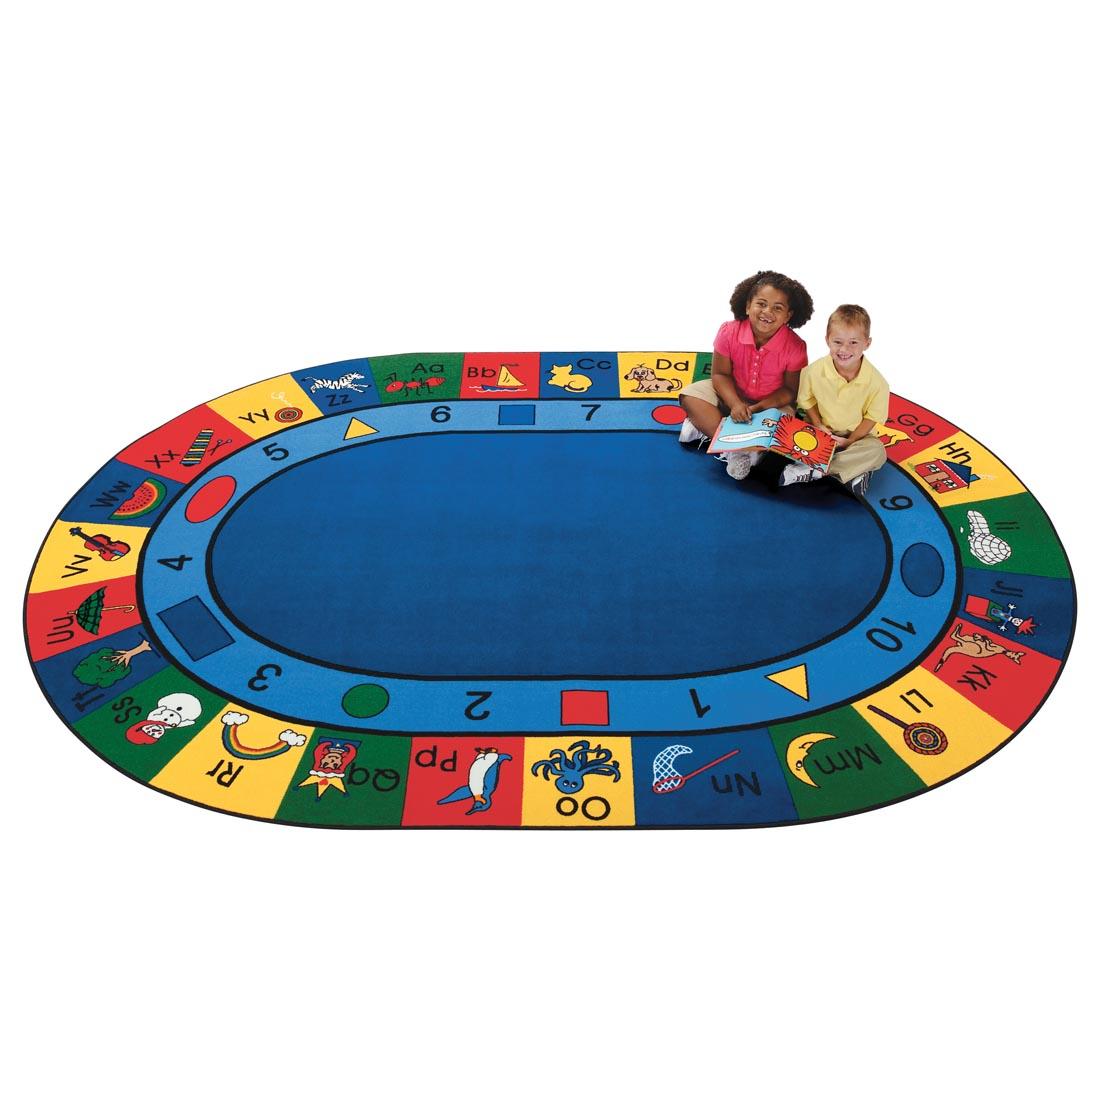 Children sitting with a book on the Blocks of Fun Oval Rug by Carpets For Kids